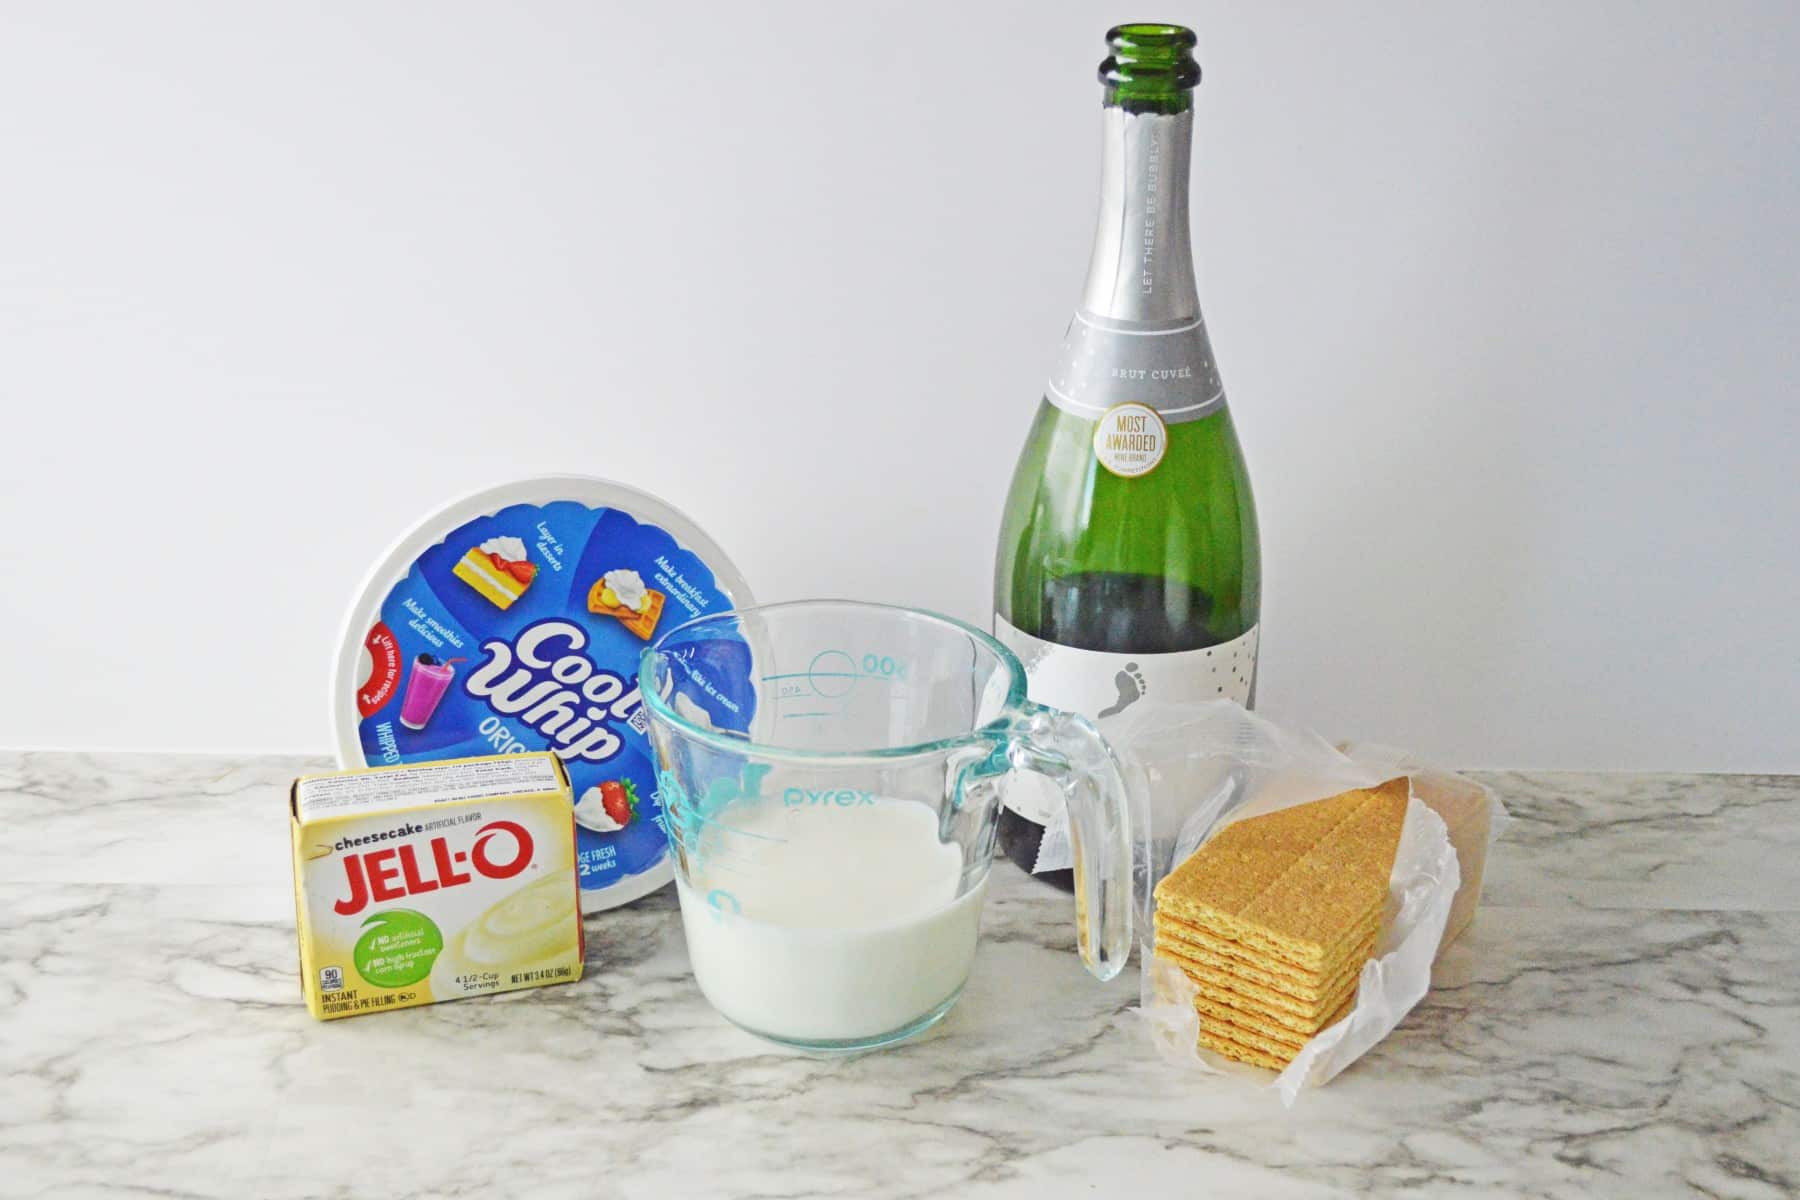 Ingredients for Champagne Cheesecake Shooters are the following:1 (3 oz.) box of instant cheesecake pudding, 1 cup milk, 1 cup champagne, 1 ½ cups cool whip whipped topping, 6 graham crackers, and 12 firework poof cocktail picks